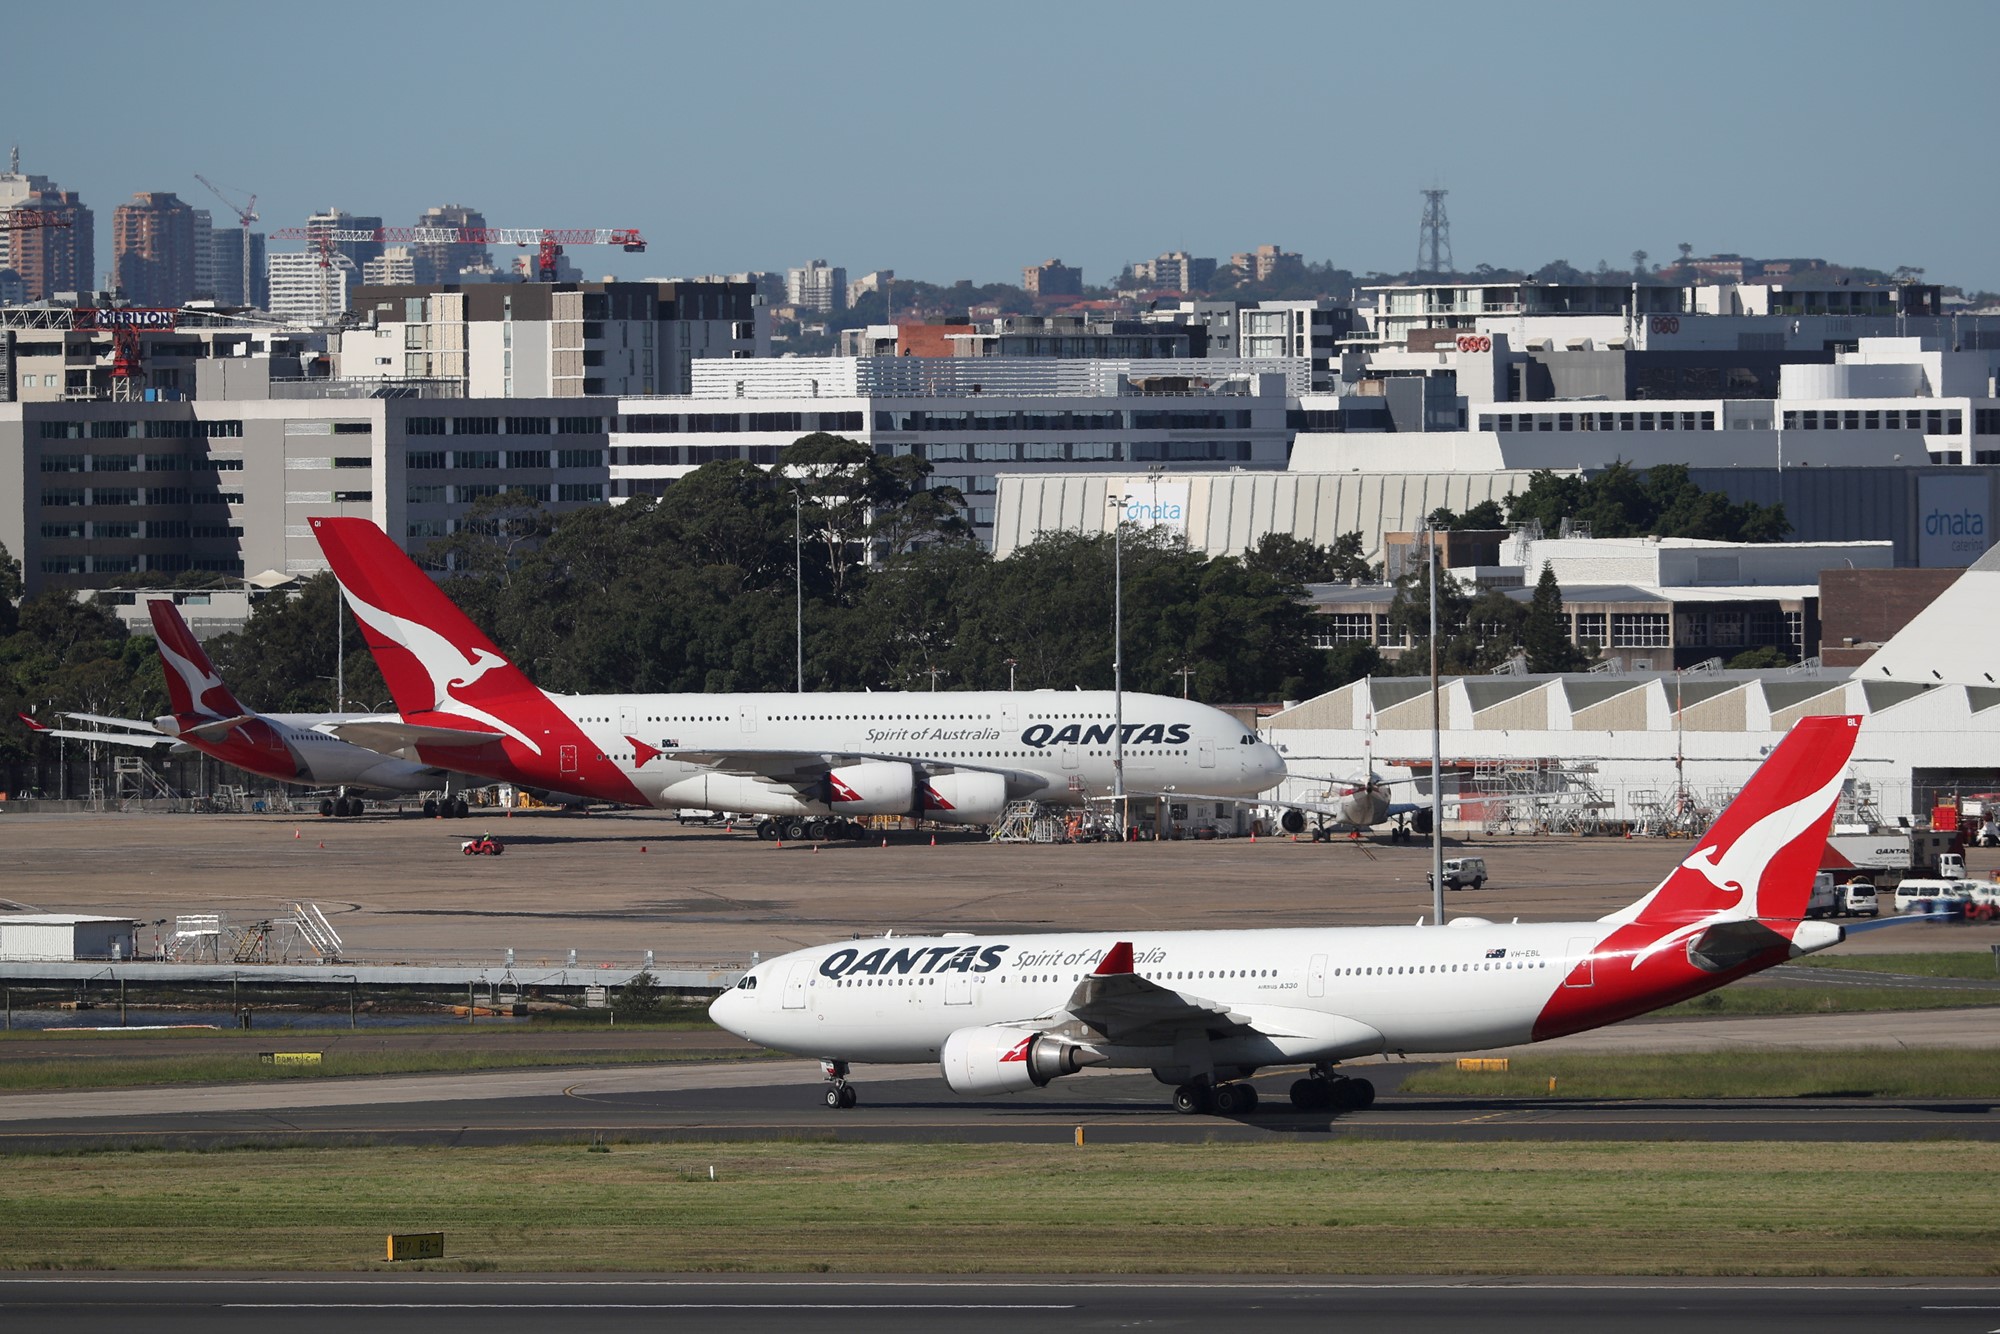 FILE PHOTO: Qantas planes are seen at Kingsford Smith International Airport in Sydney, Australia, March 18, 2020.